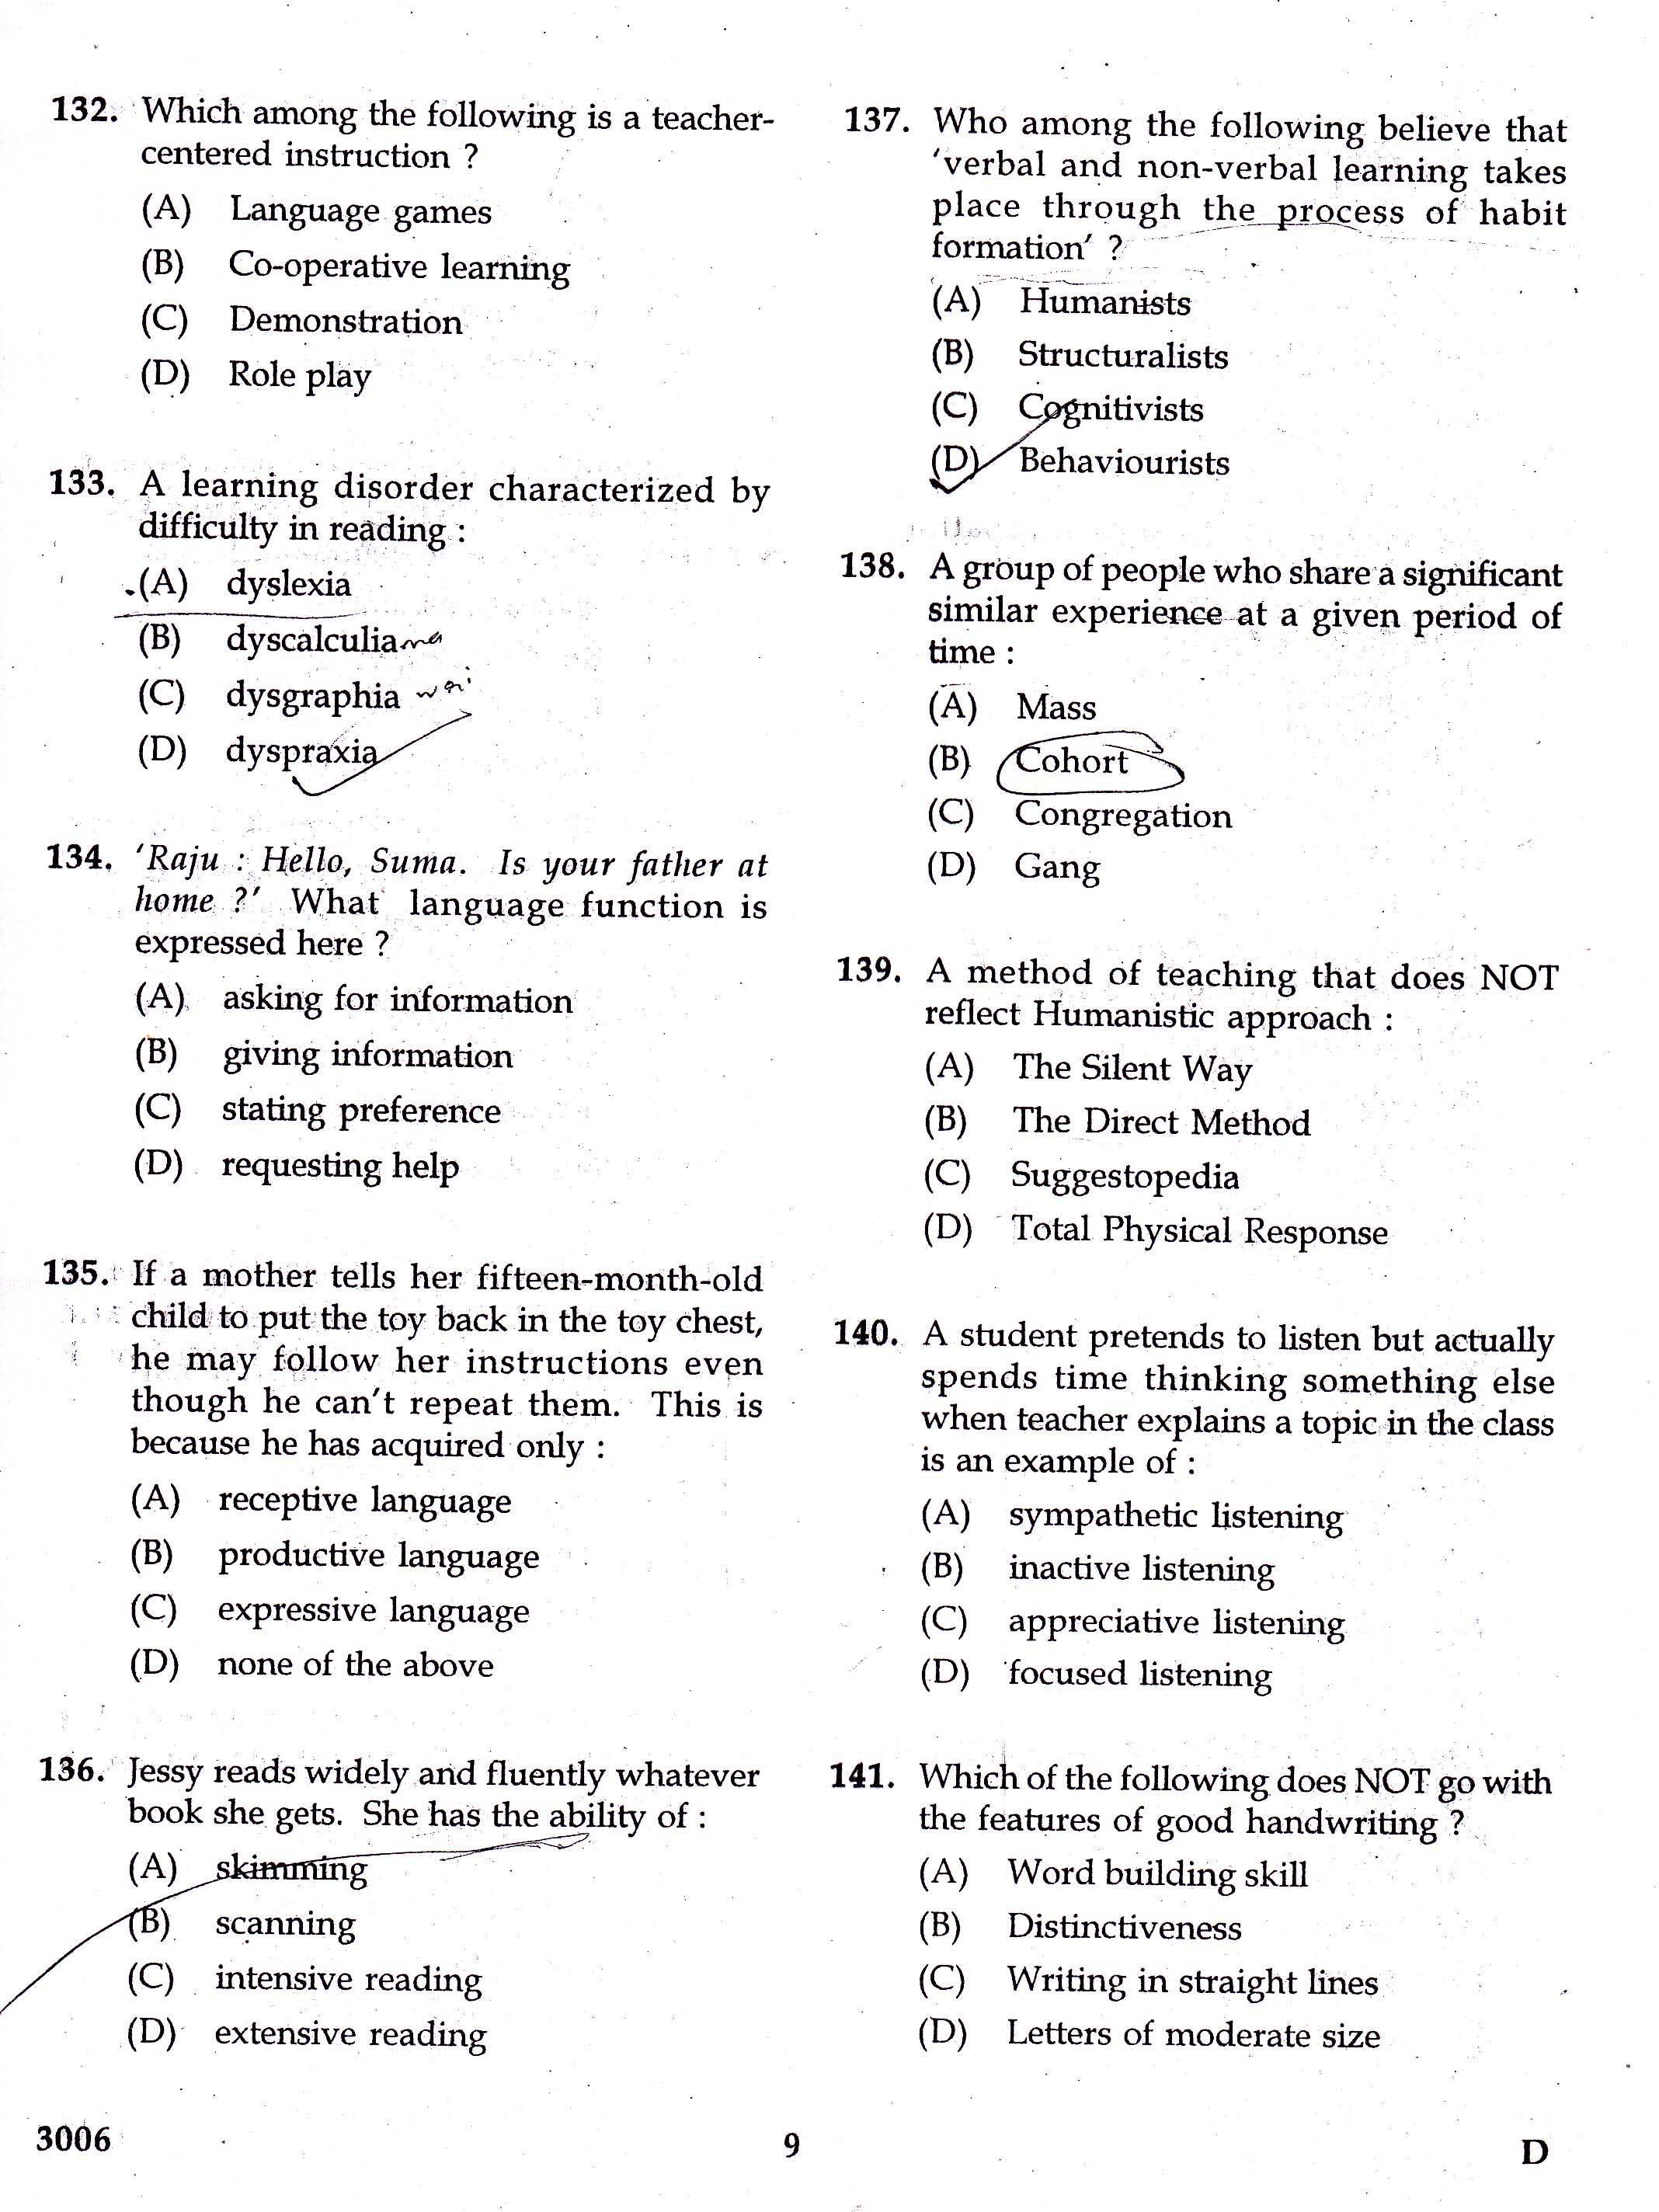 KTET Category III Part 3 English Question Paper with Answers 2017 7